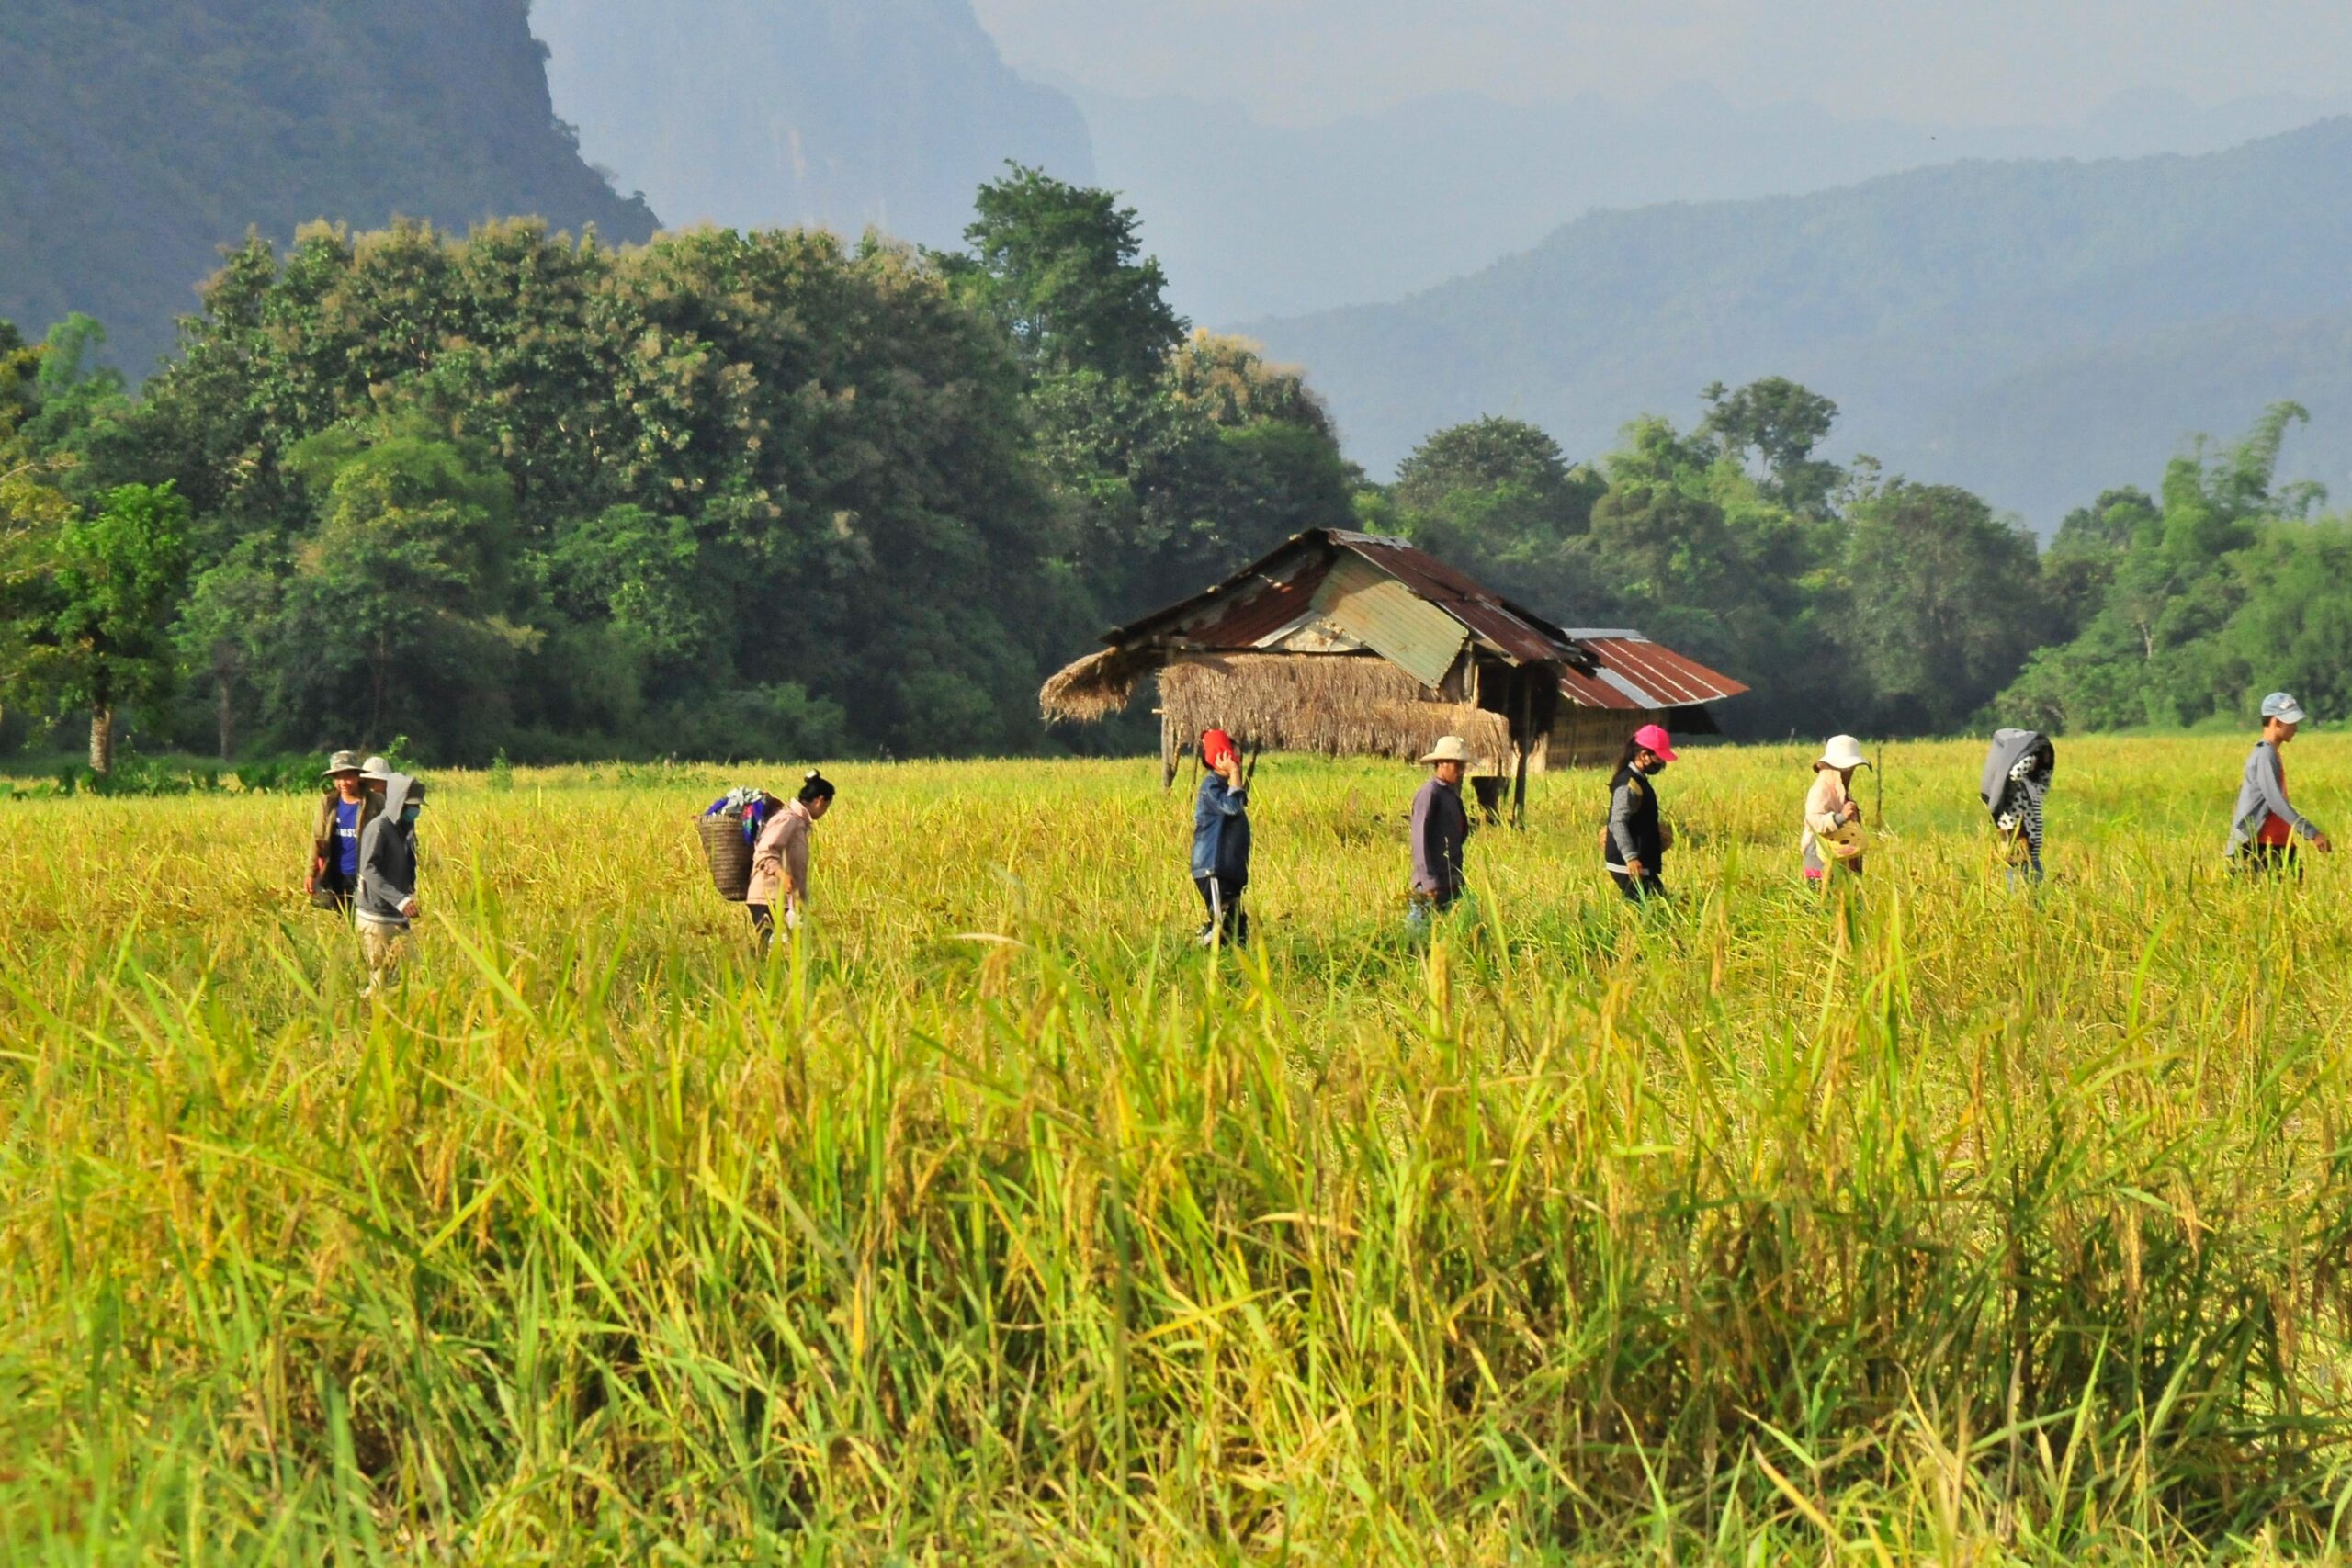 These people were returning home after a hard day's work on the field, Vang Vieng, Laos